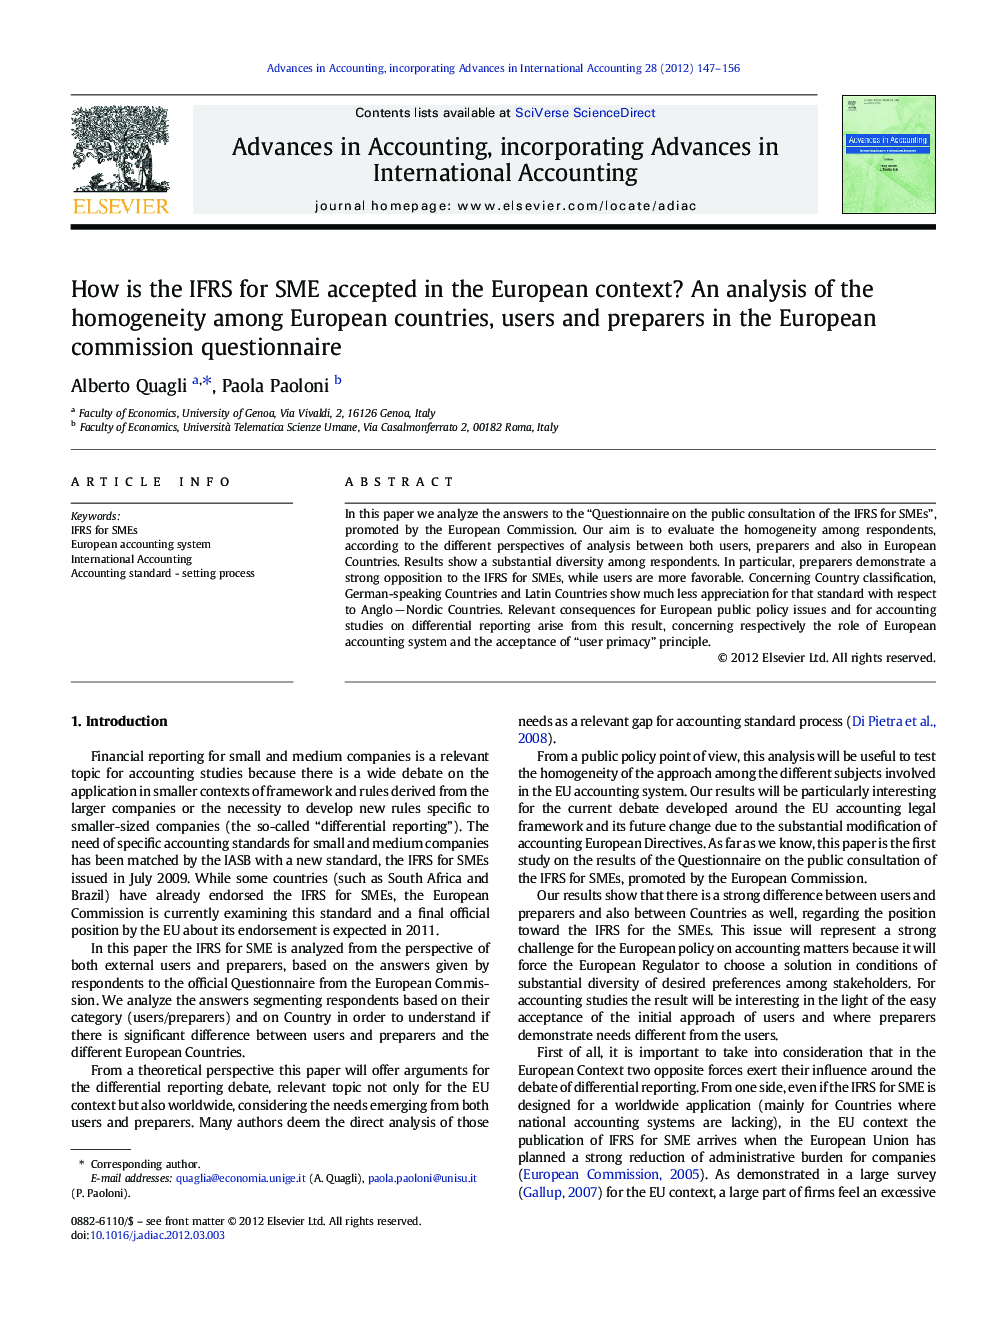 How is the IFRS for SME accepted in the European context? An analysis of the homogeneity among European countries, users and preparers in the European commission questionnaire